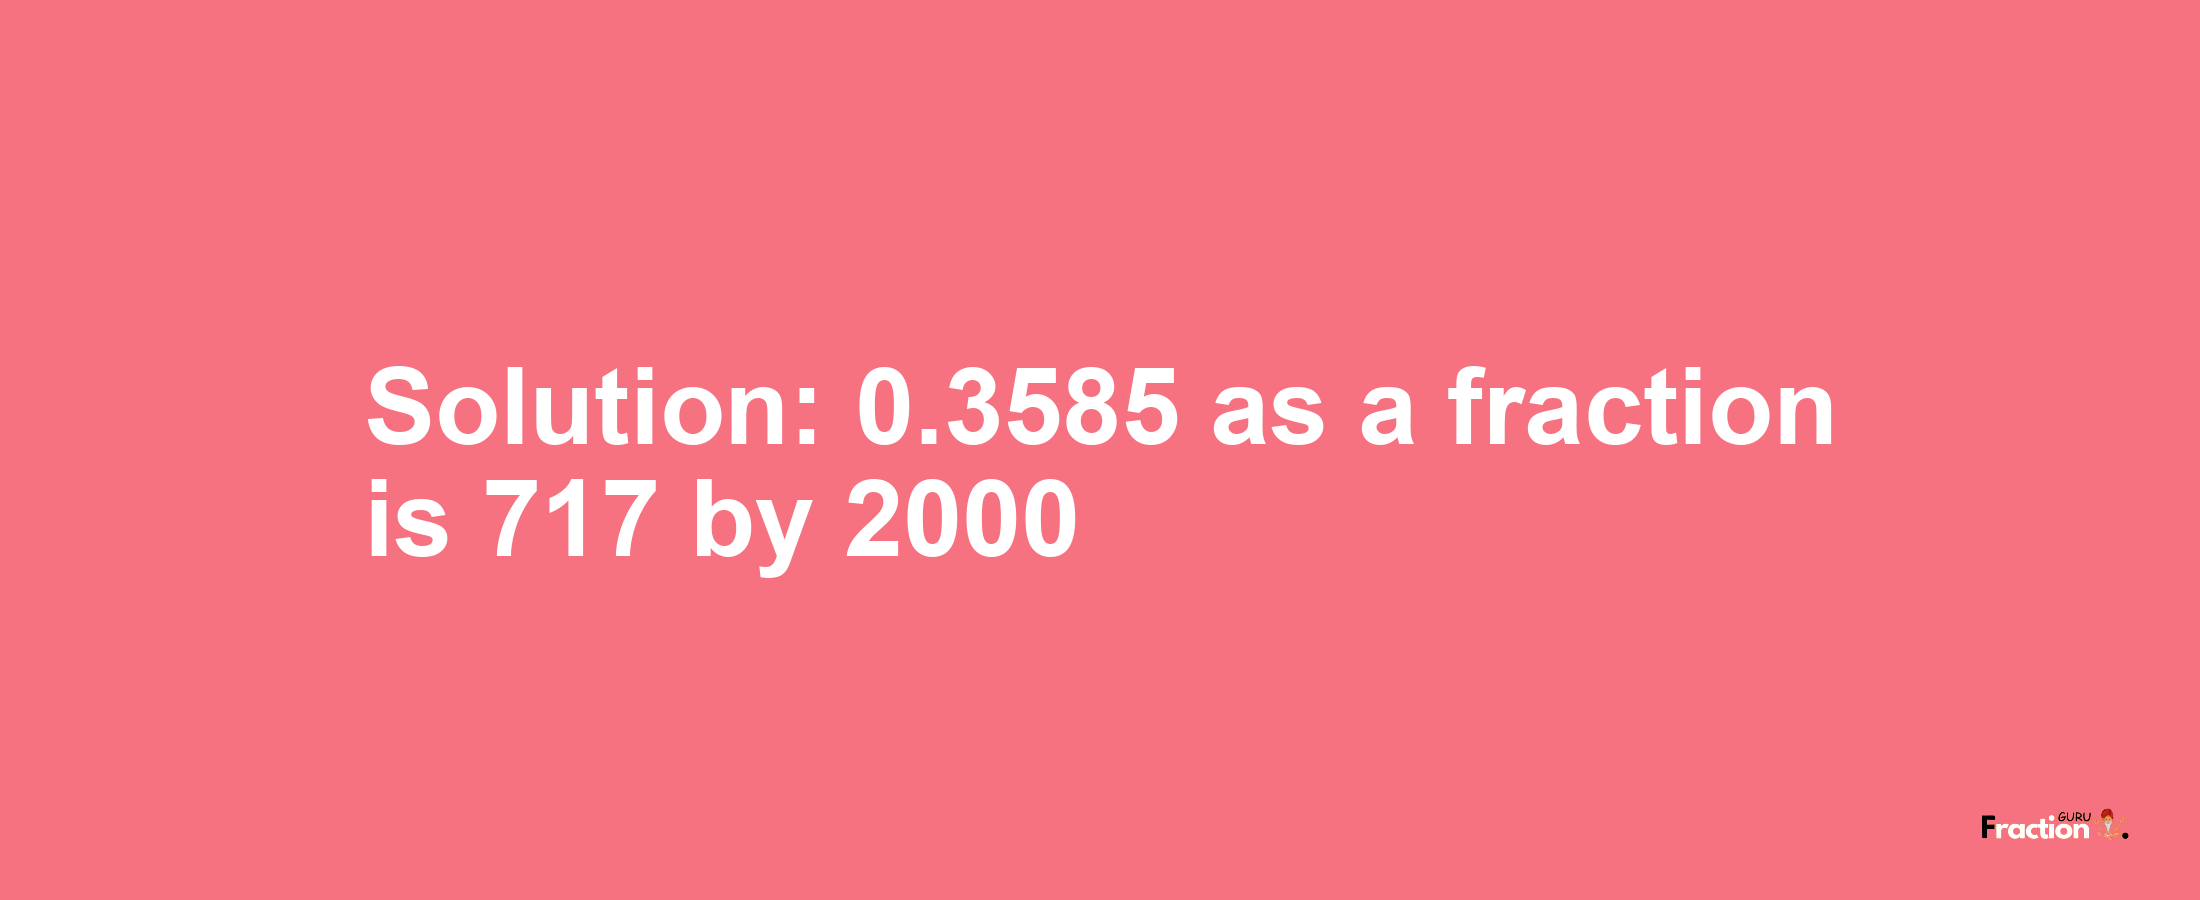 Solution:0.3585 as a fraction is 717/2000